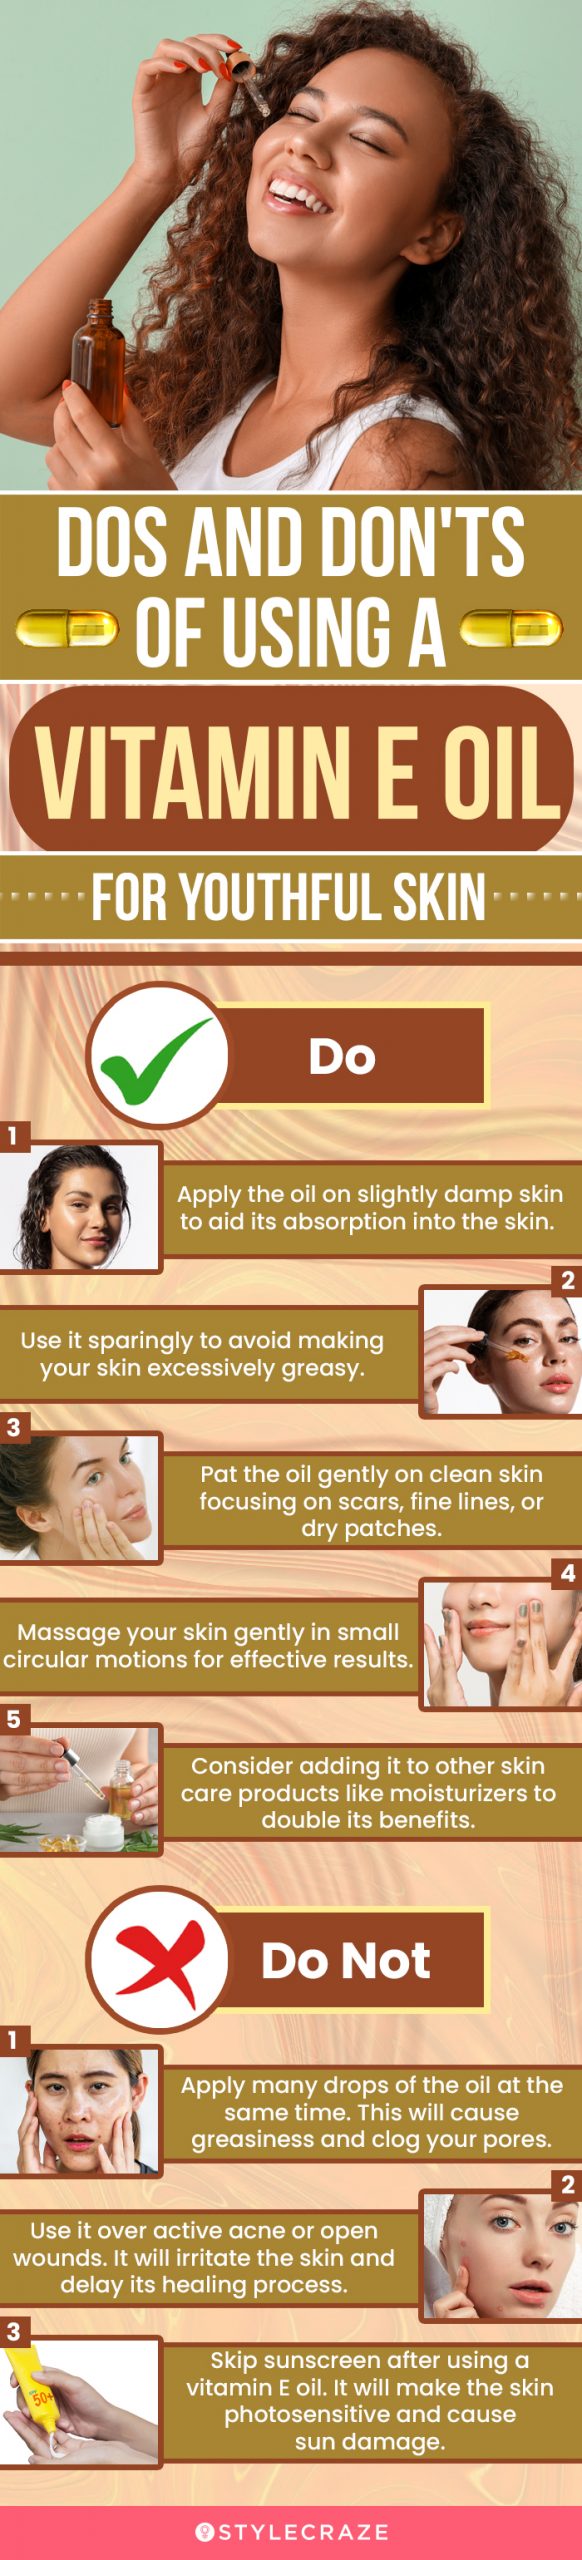 Dos And Don'ts Of Using A Vitamin E Oil For Youthful Skin (infographic)